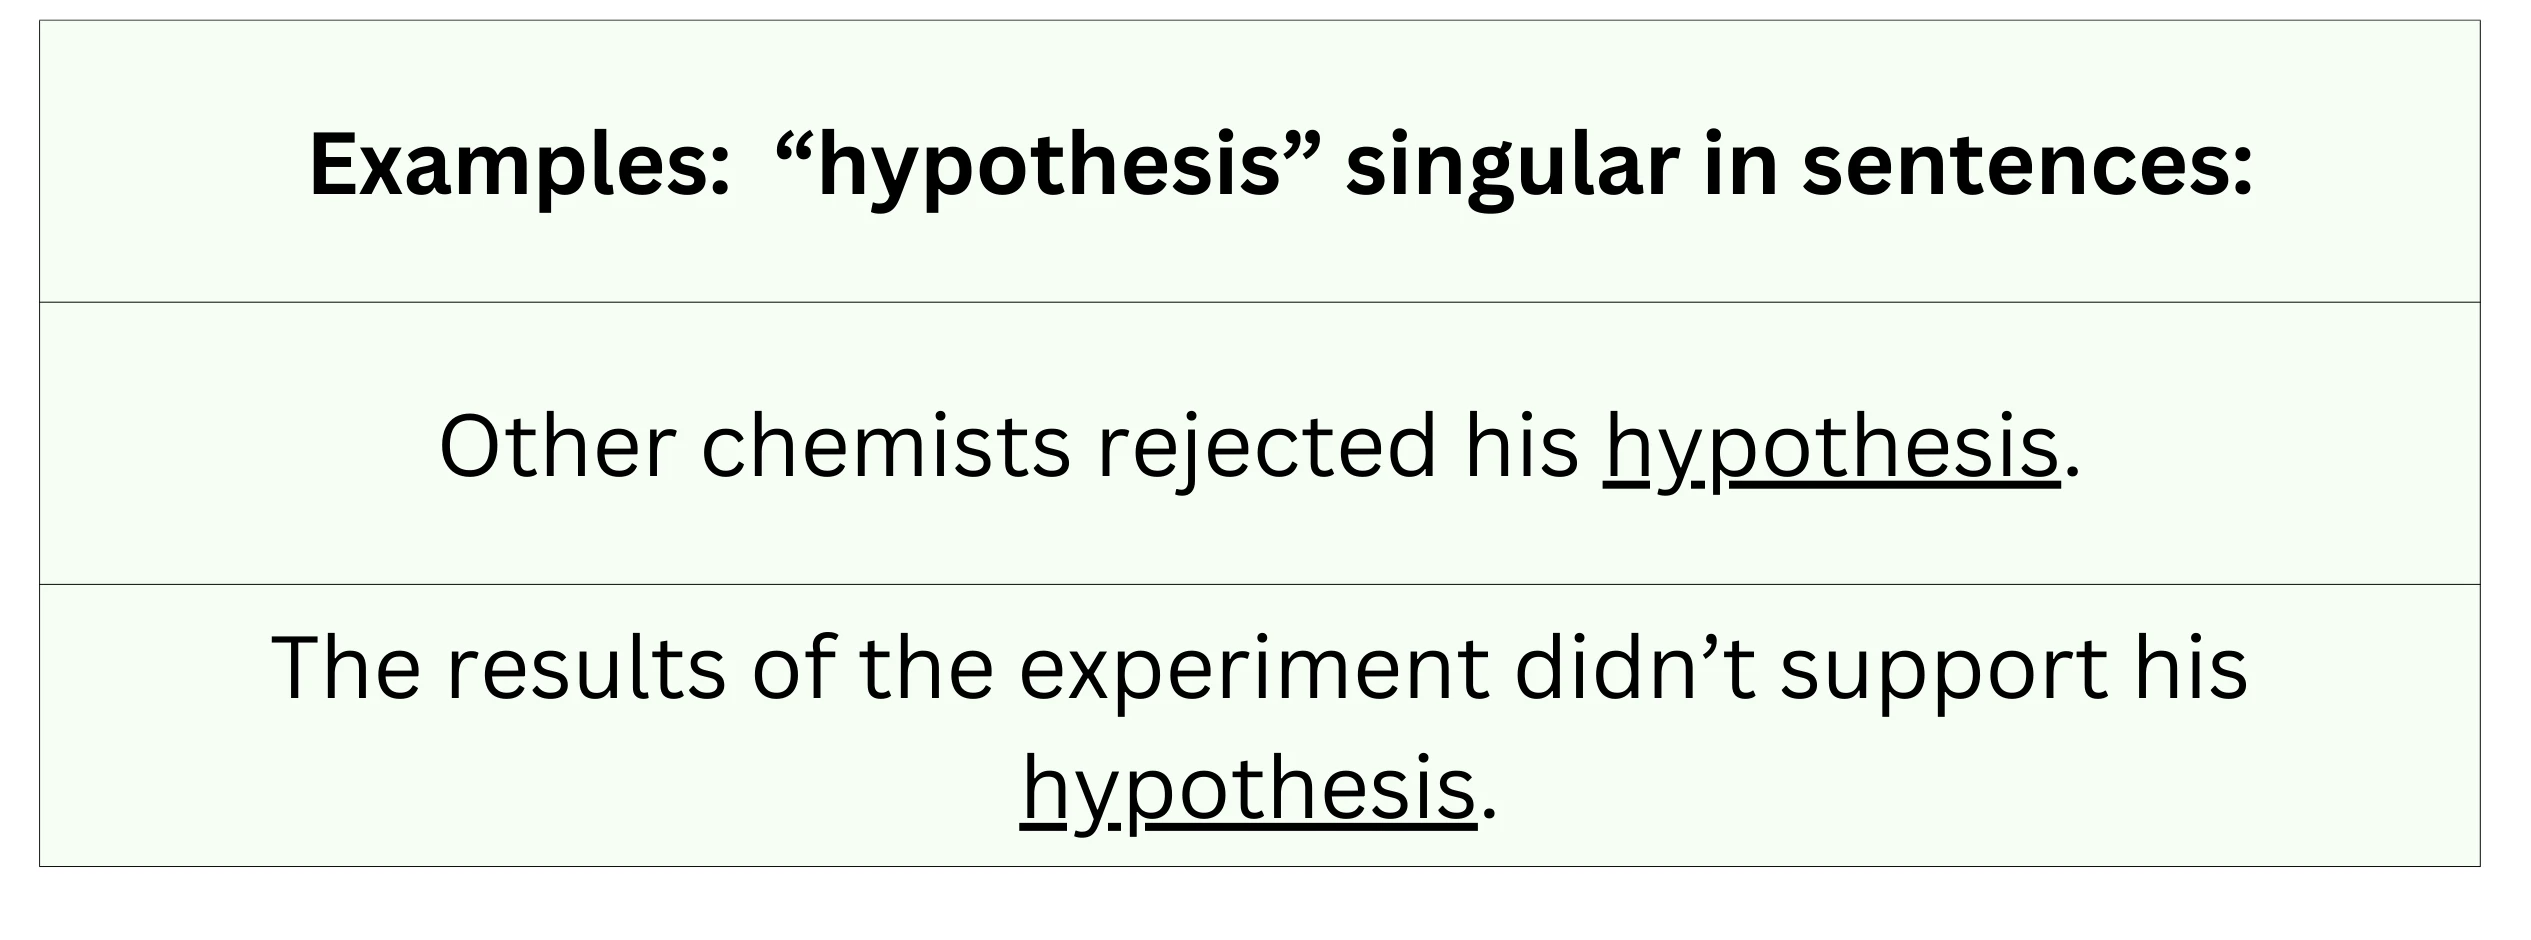 hypotheses the plural of hypothesis